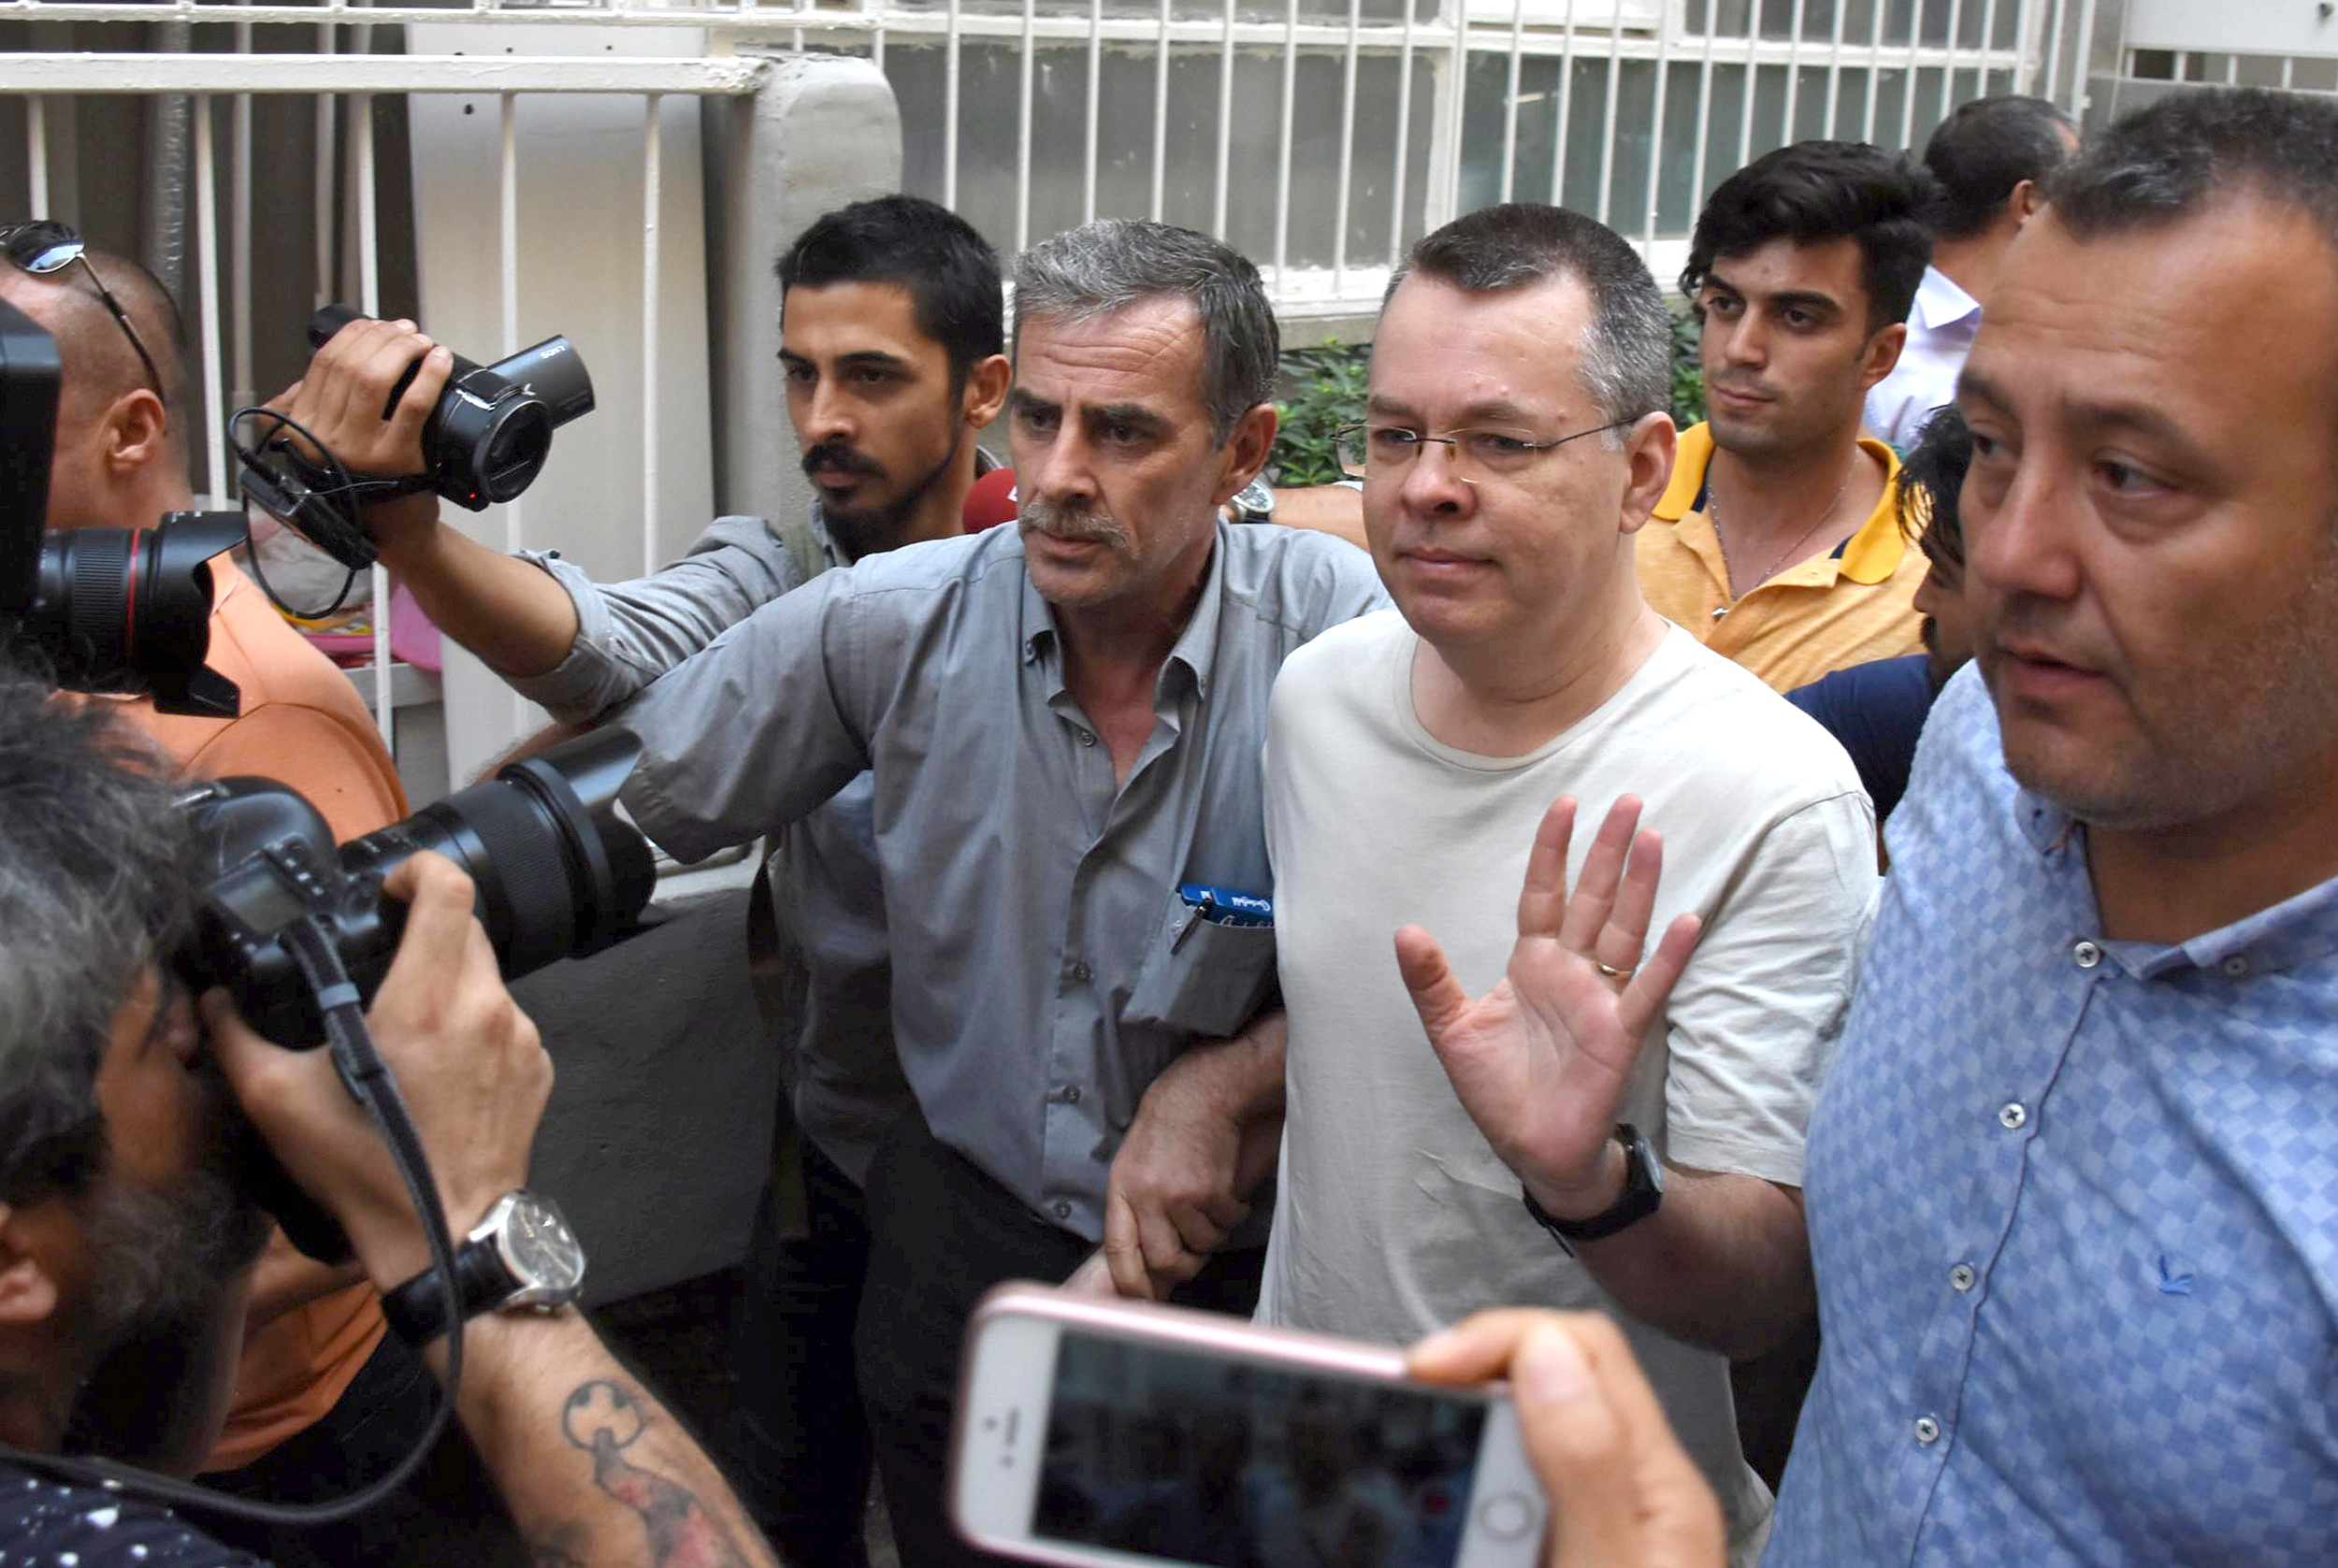 PHOTO: U.S. pastor Andrew Brunson reacts as he arrives at his home after being released from the prison in Izmir, Turkey, July 25, 2018.